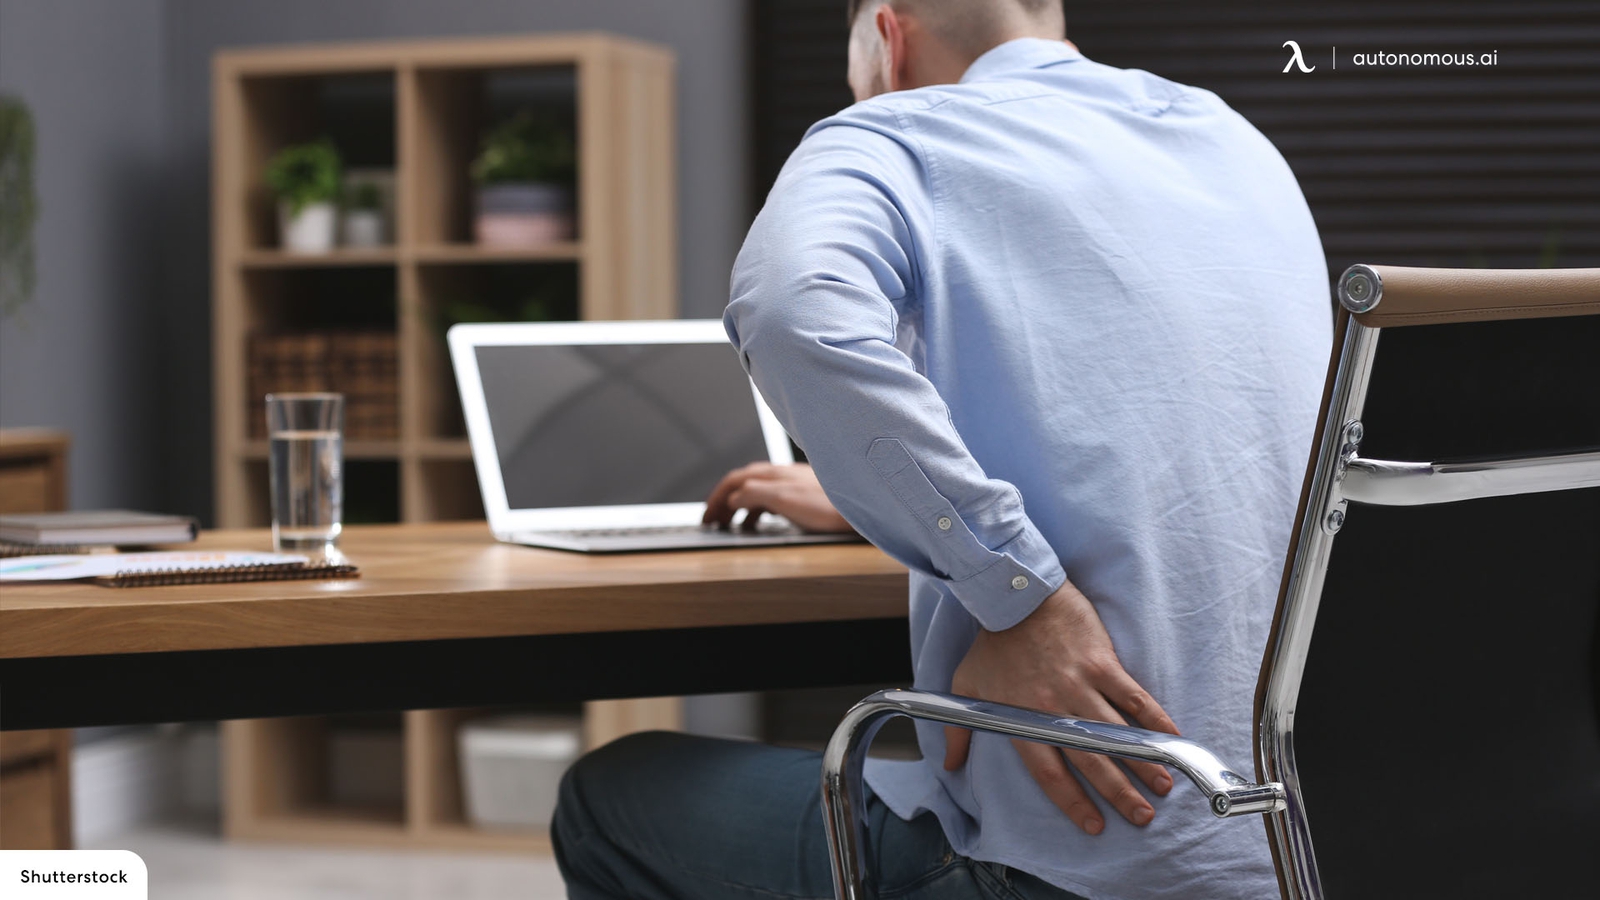 Posture Types & How to Correct Bad Posture